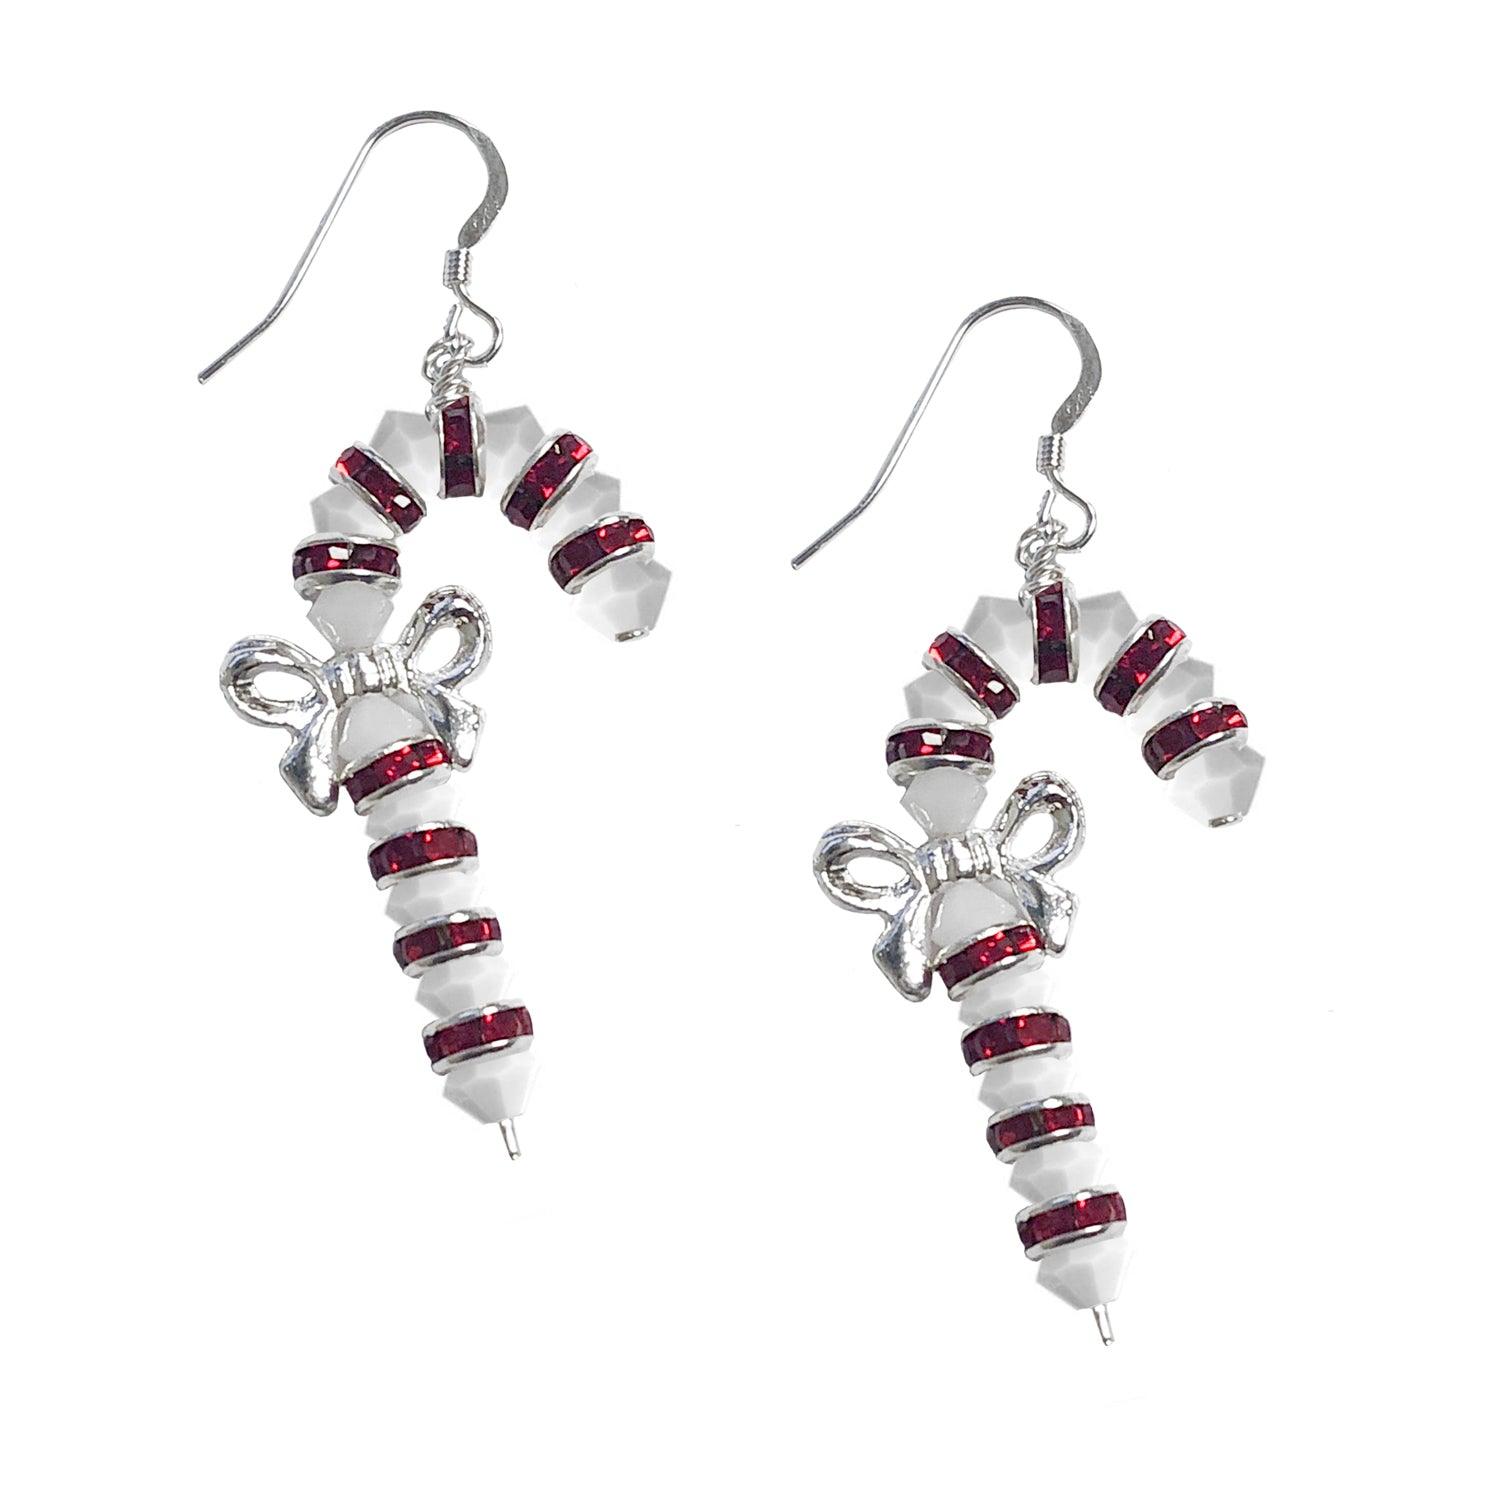 2018 Candy Cane Earring Kit Instructions